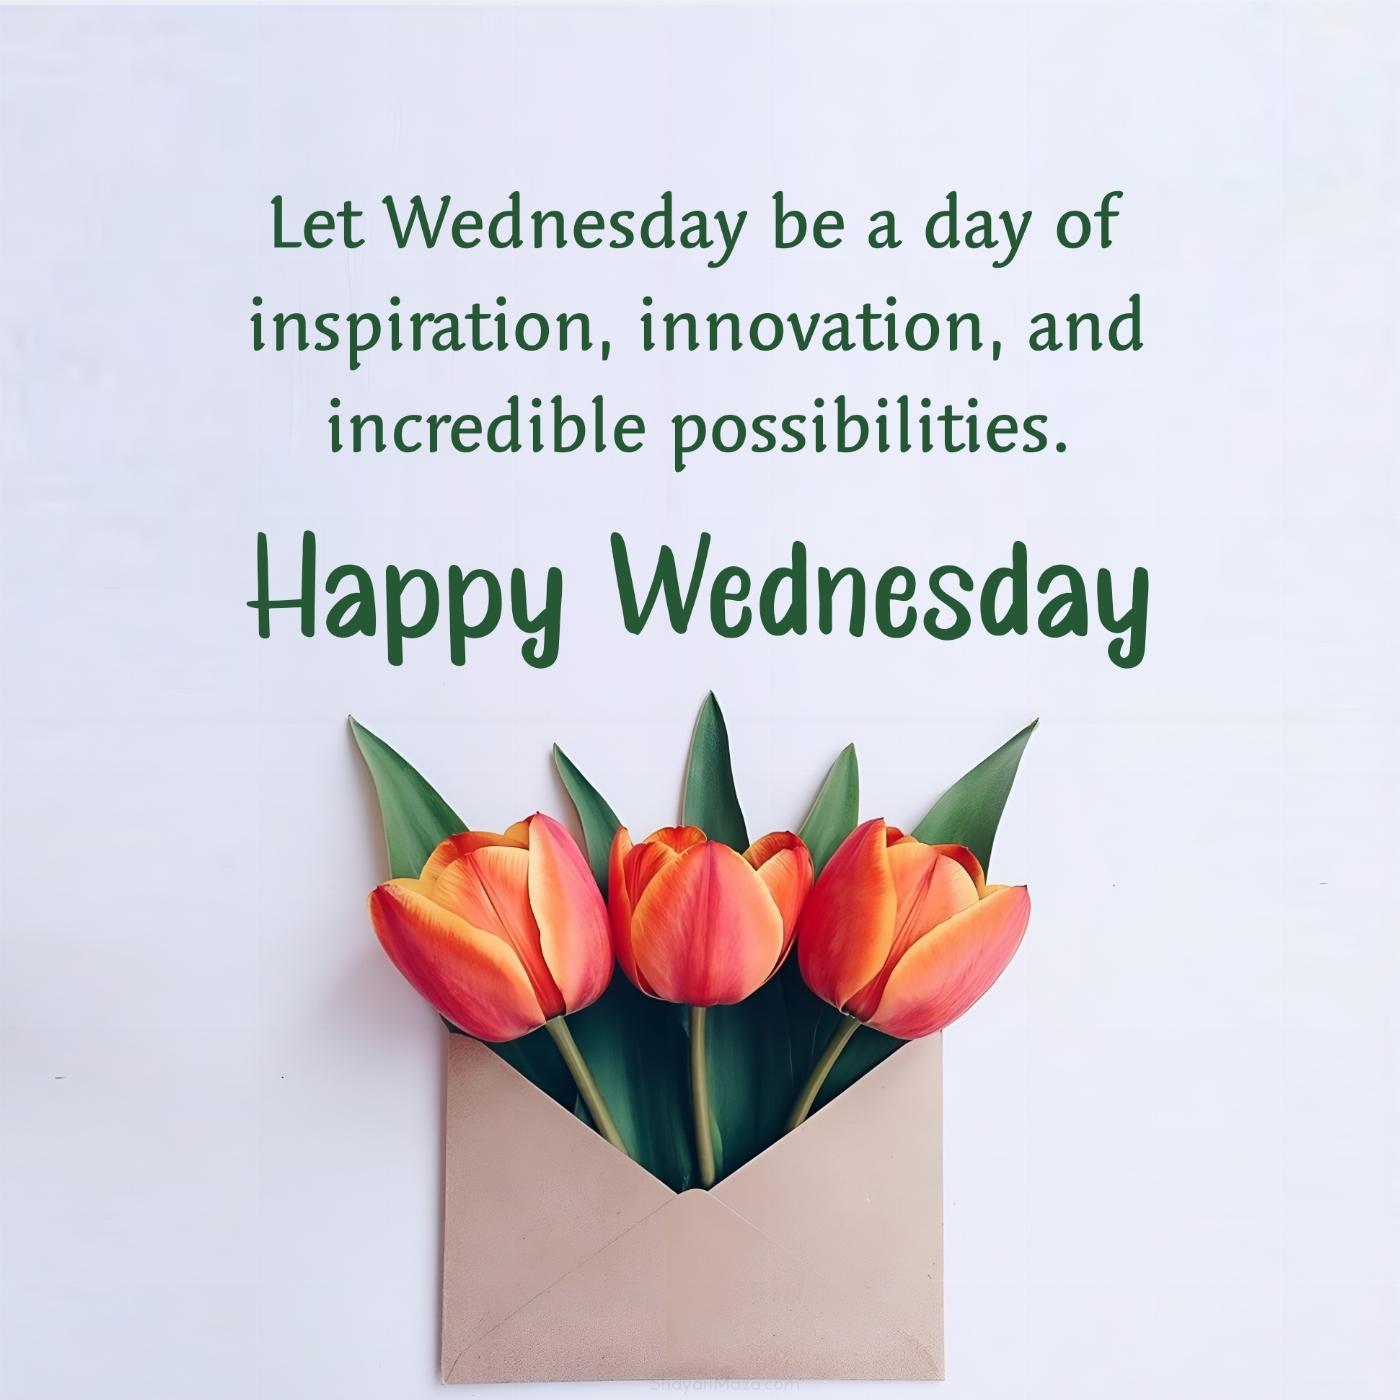 Let Wednesday be a day of inspiration innovation and incredible possibilities